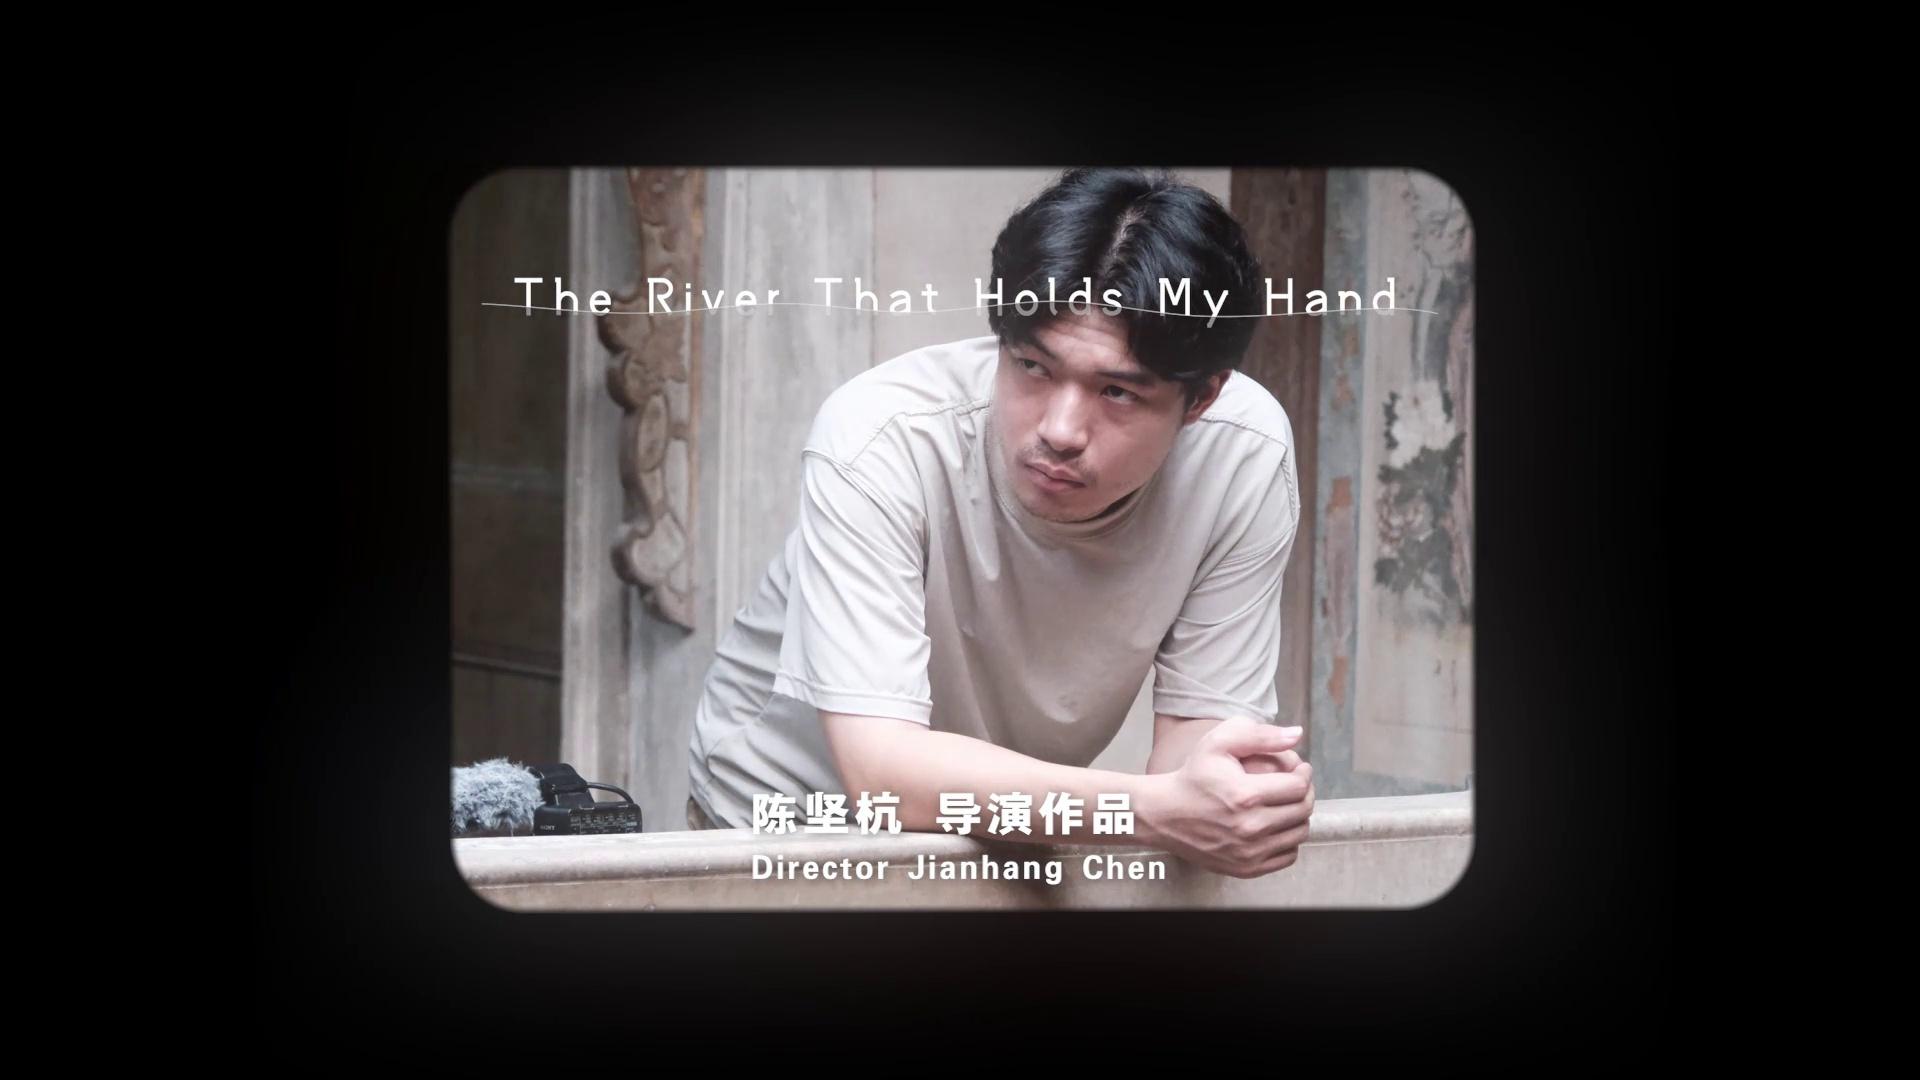 Behind-the-scenes video of the short film “The River that Holds My Hand” premieres!